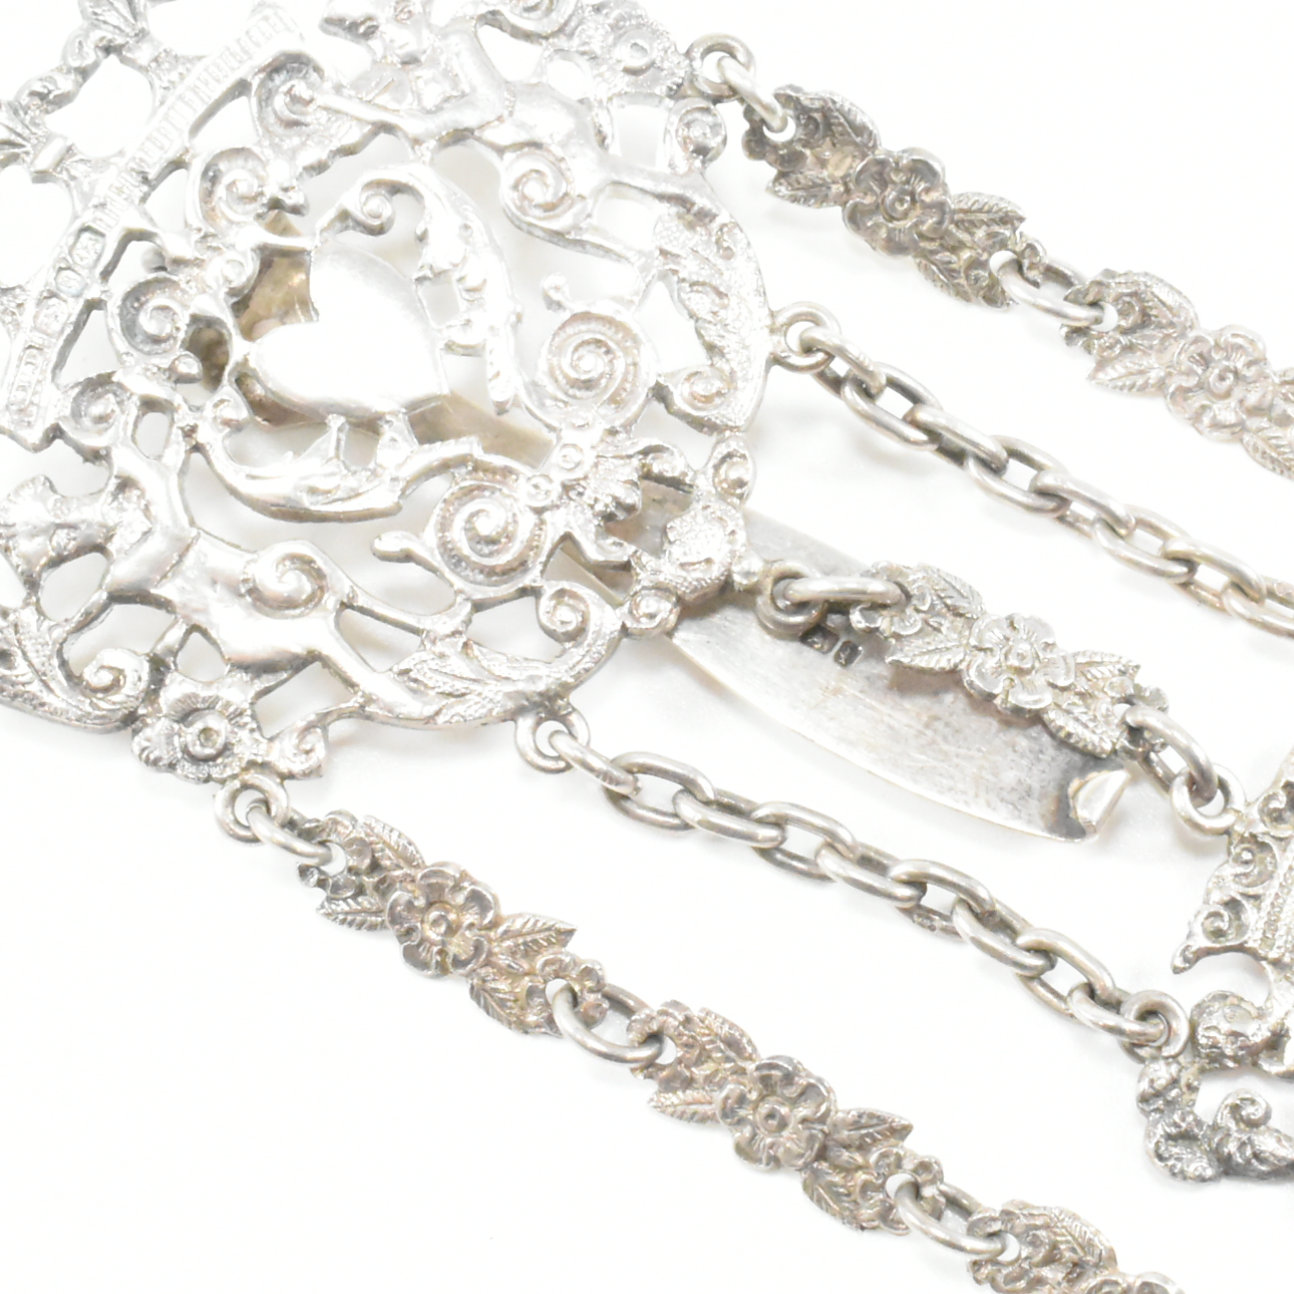 19TH CENTURY VICTORIAN HALLMARKED SILVER CHATELAINE - Image 4 of 18